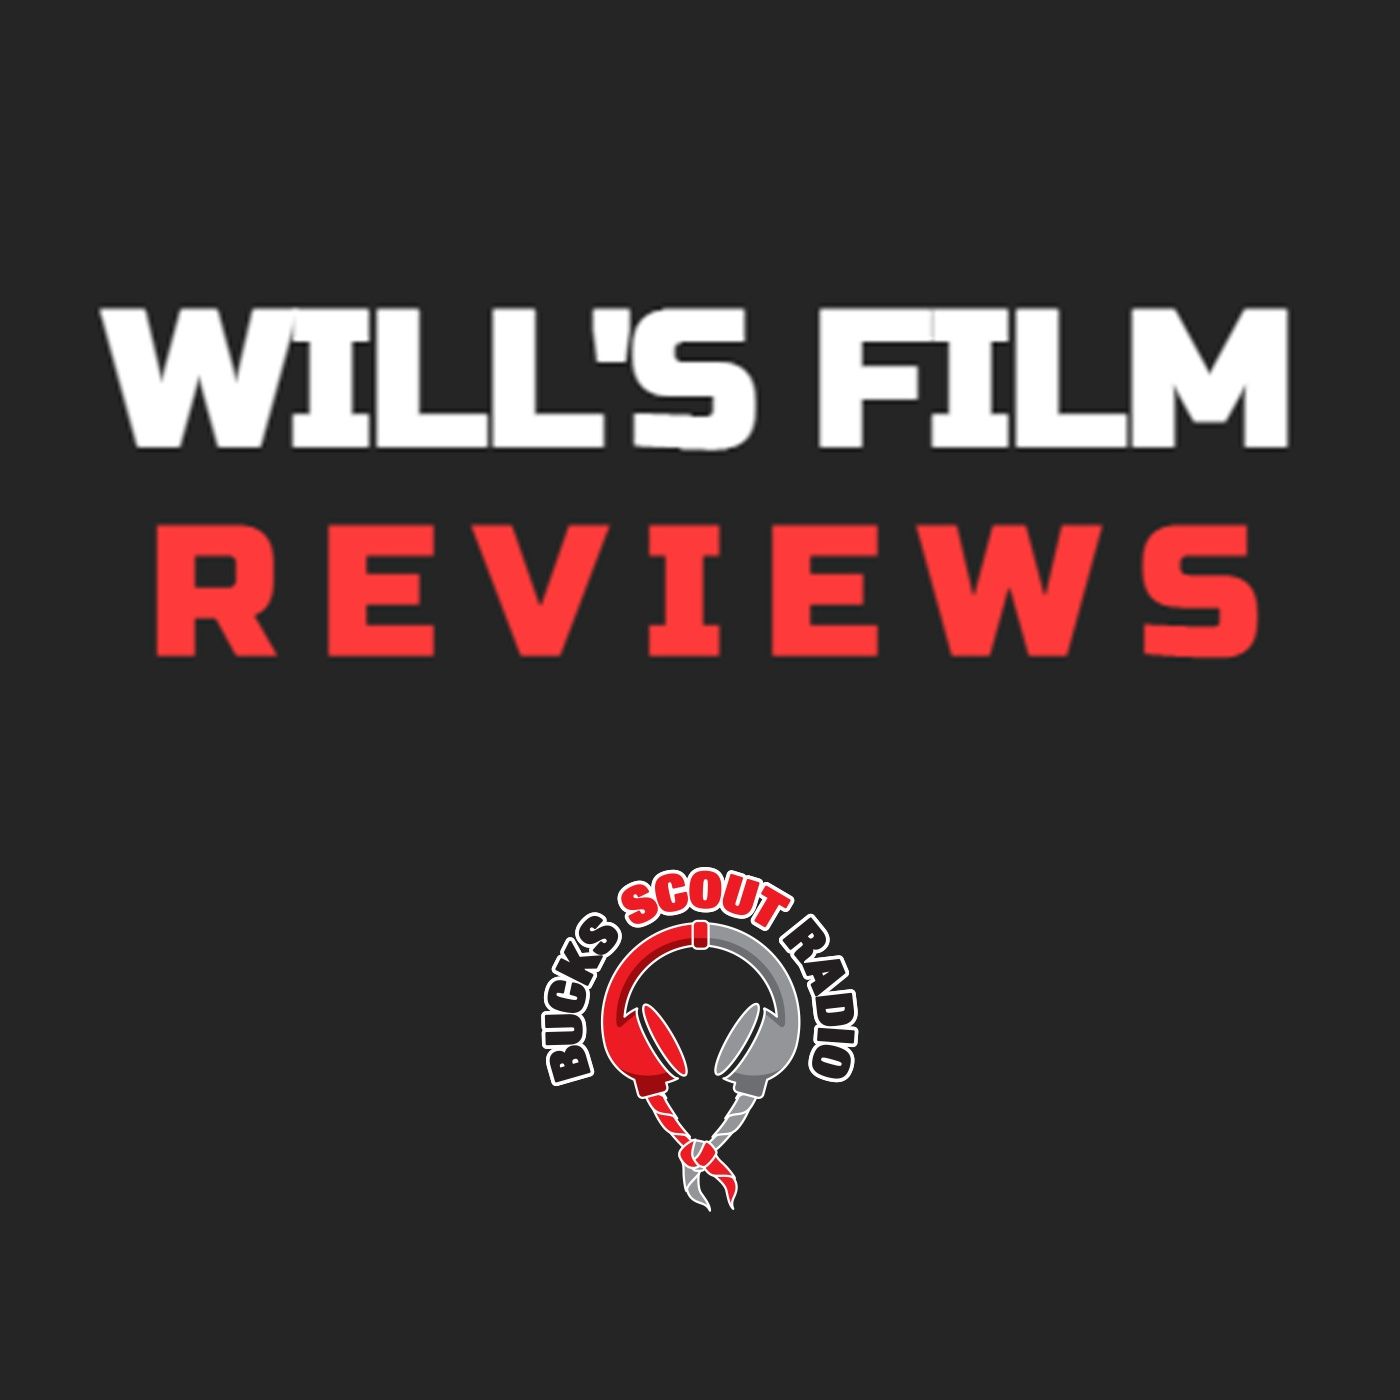 Will’s Film Reviews (with BSR)